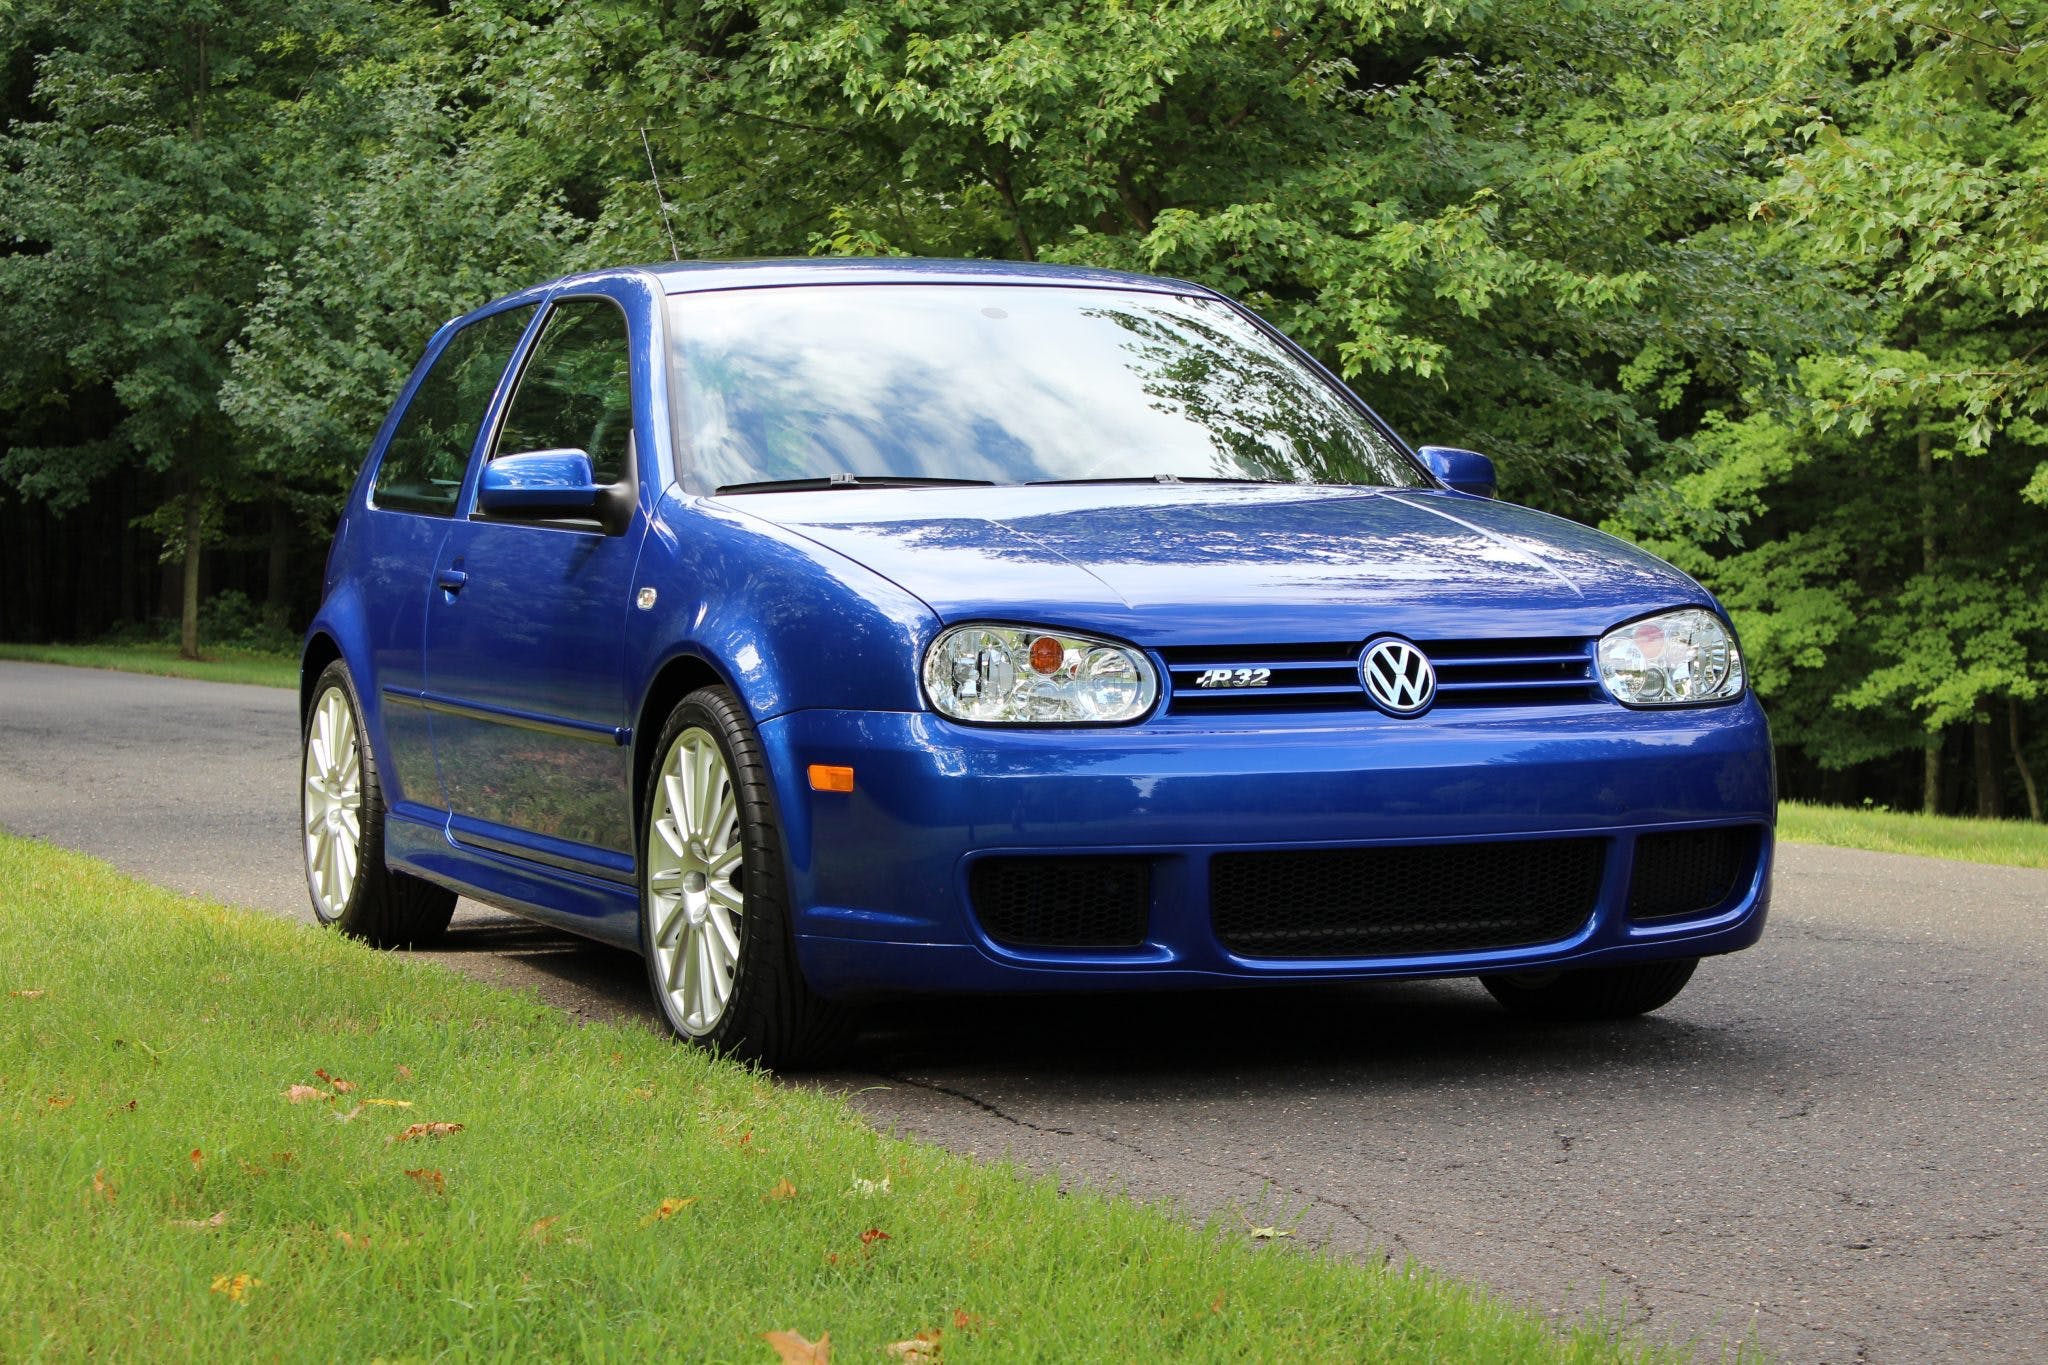 Here's why this VW R32 just sold for $65,000 - Hagerty Media